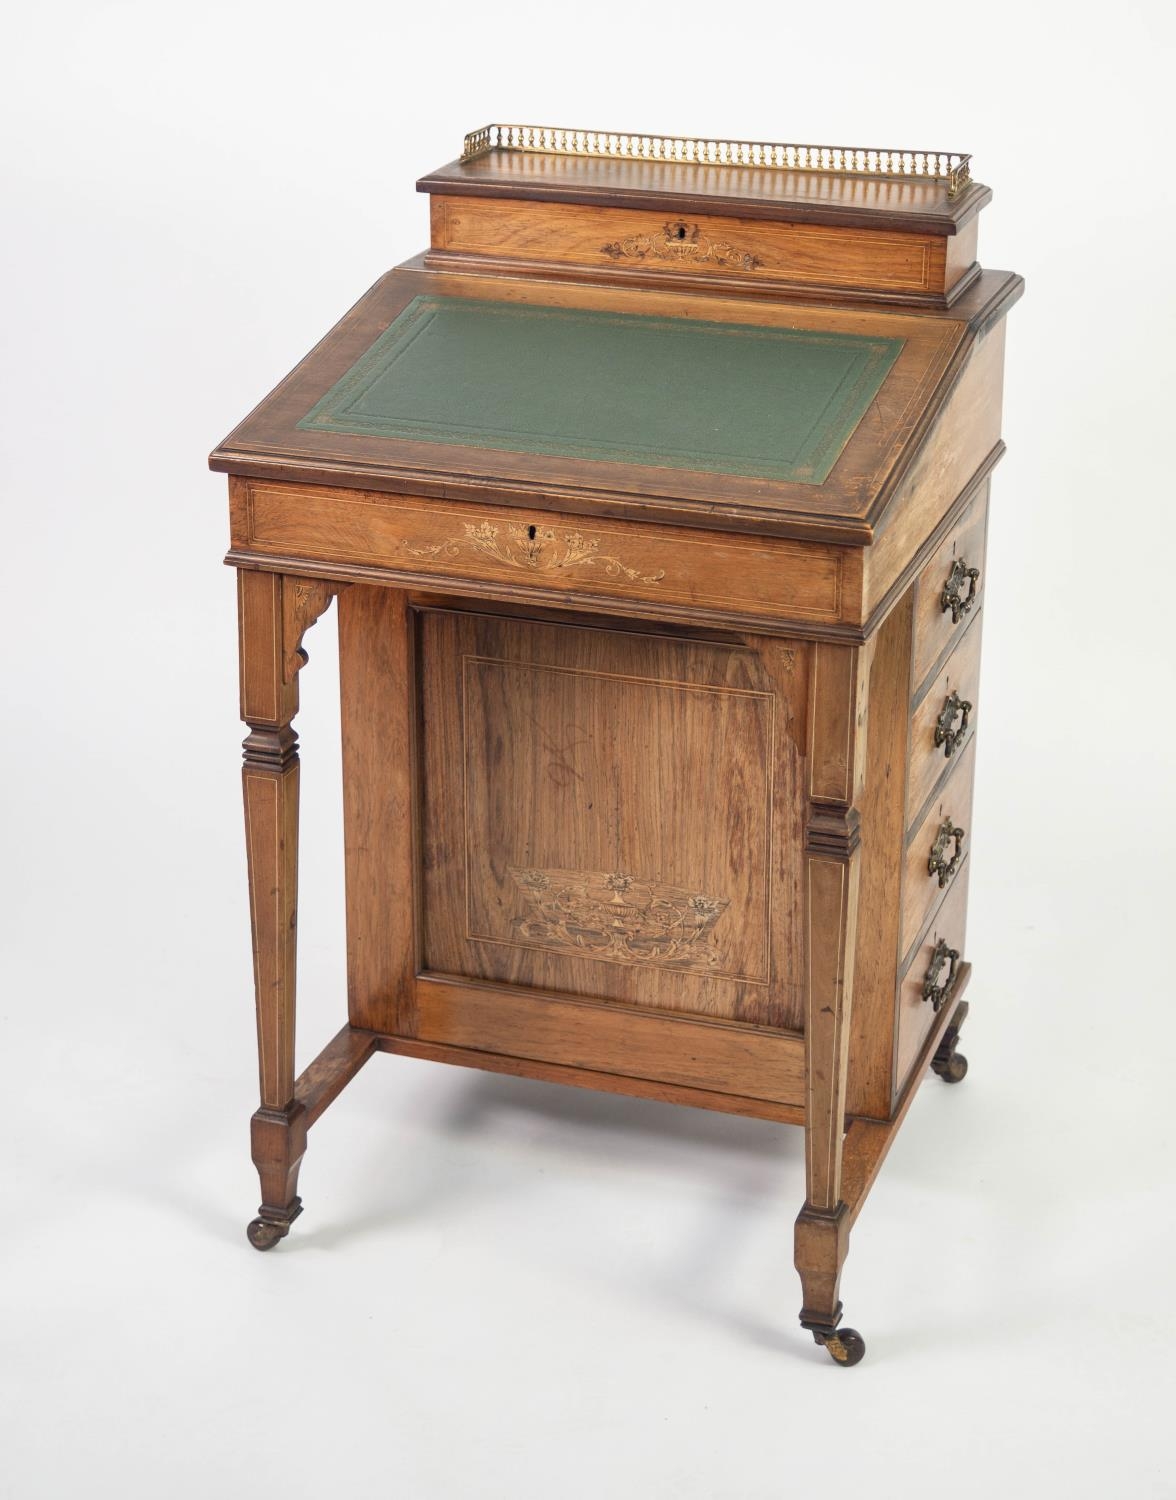 EDWARDIAN INLAID ROSEWOOD DAVENPORT DESK, of typical form with raised stationery compartment with